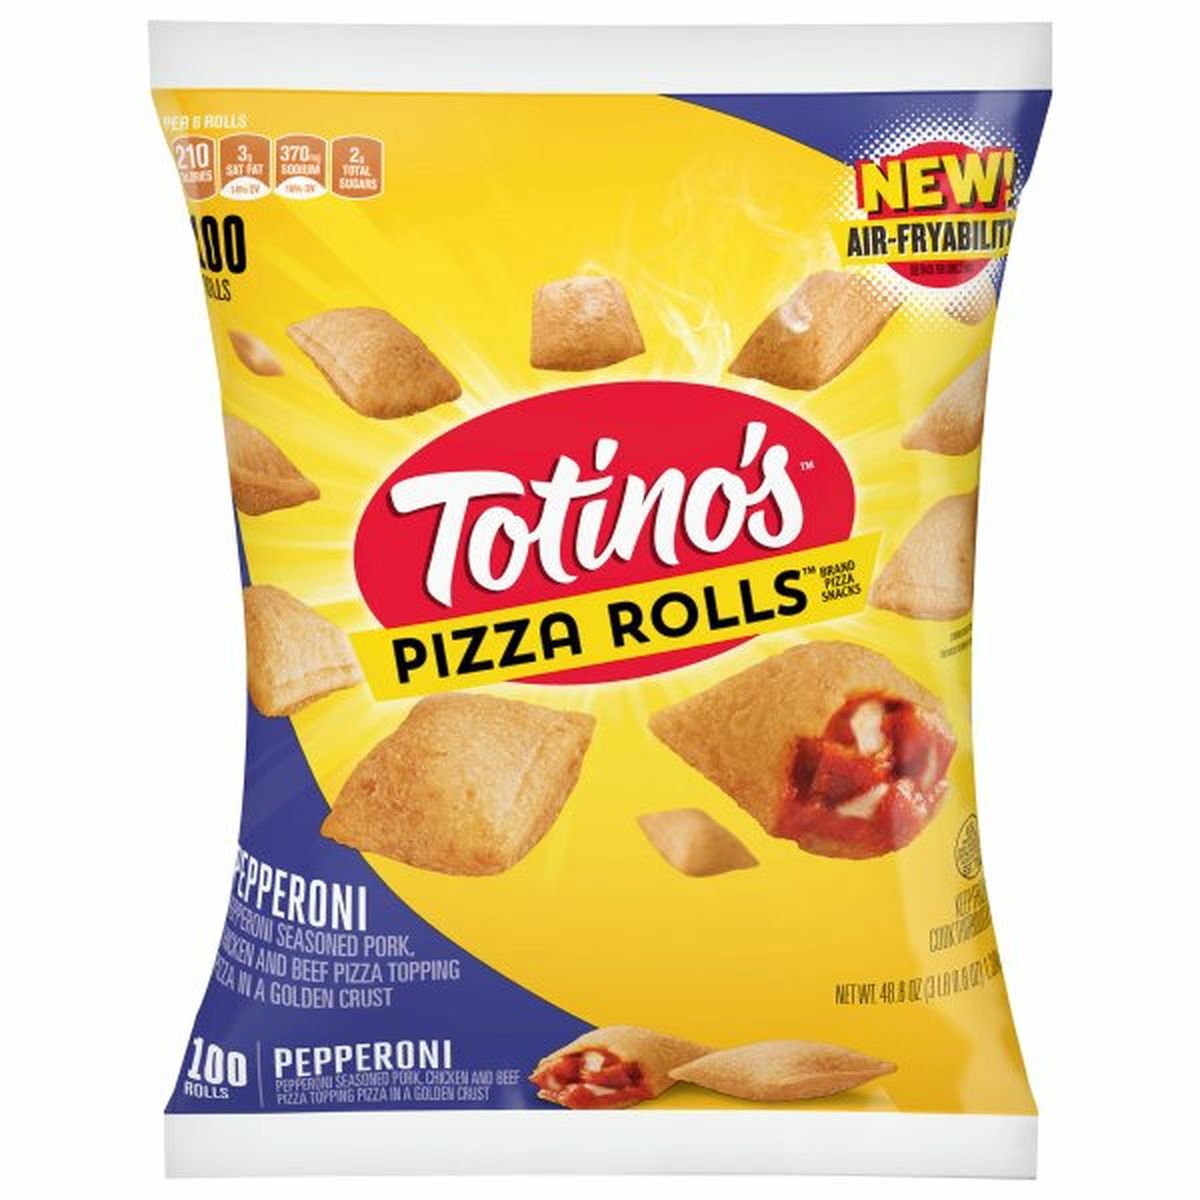 Calories in Totino's Pizza Rolls, Pepperoni